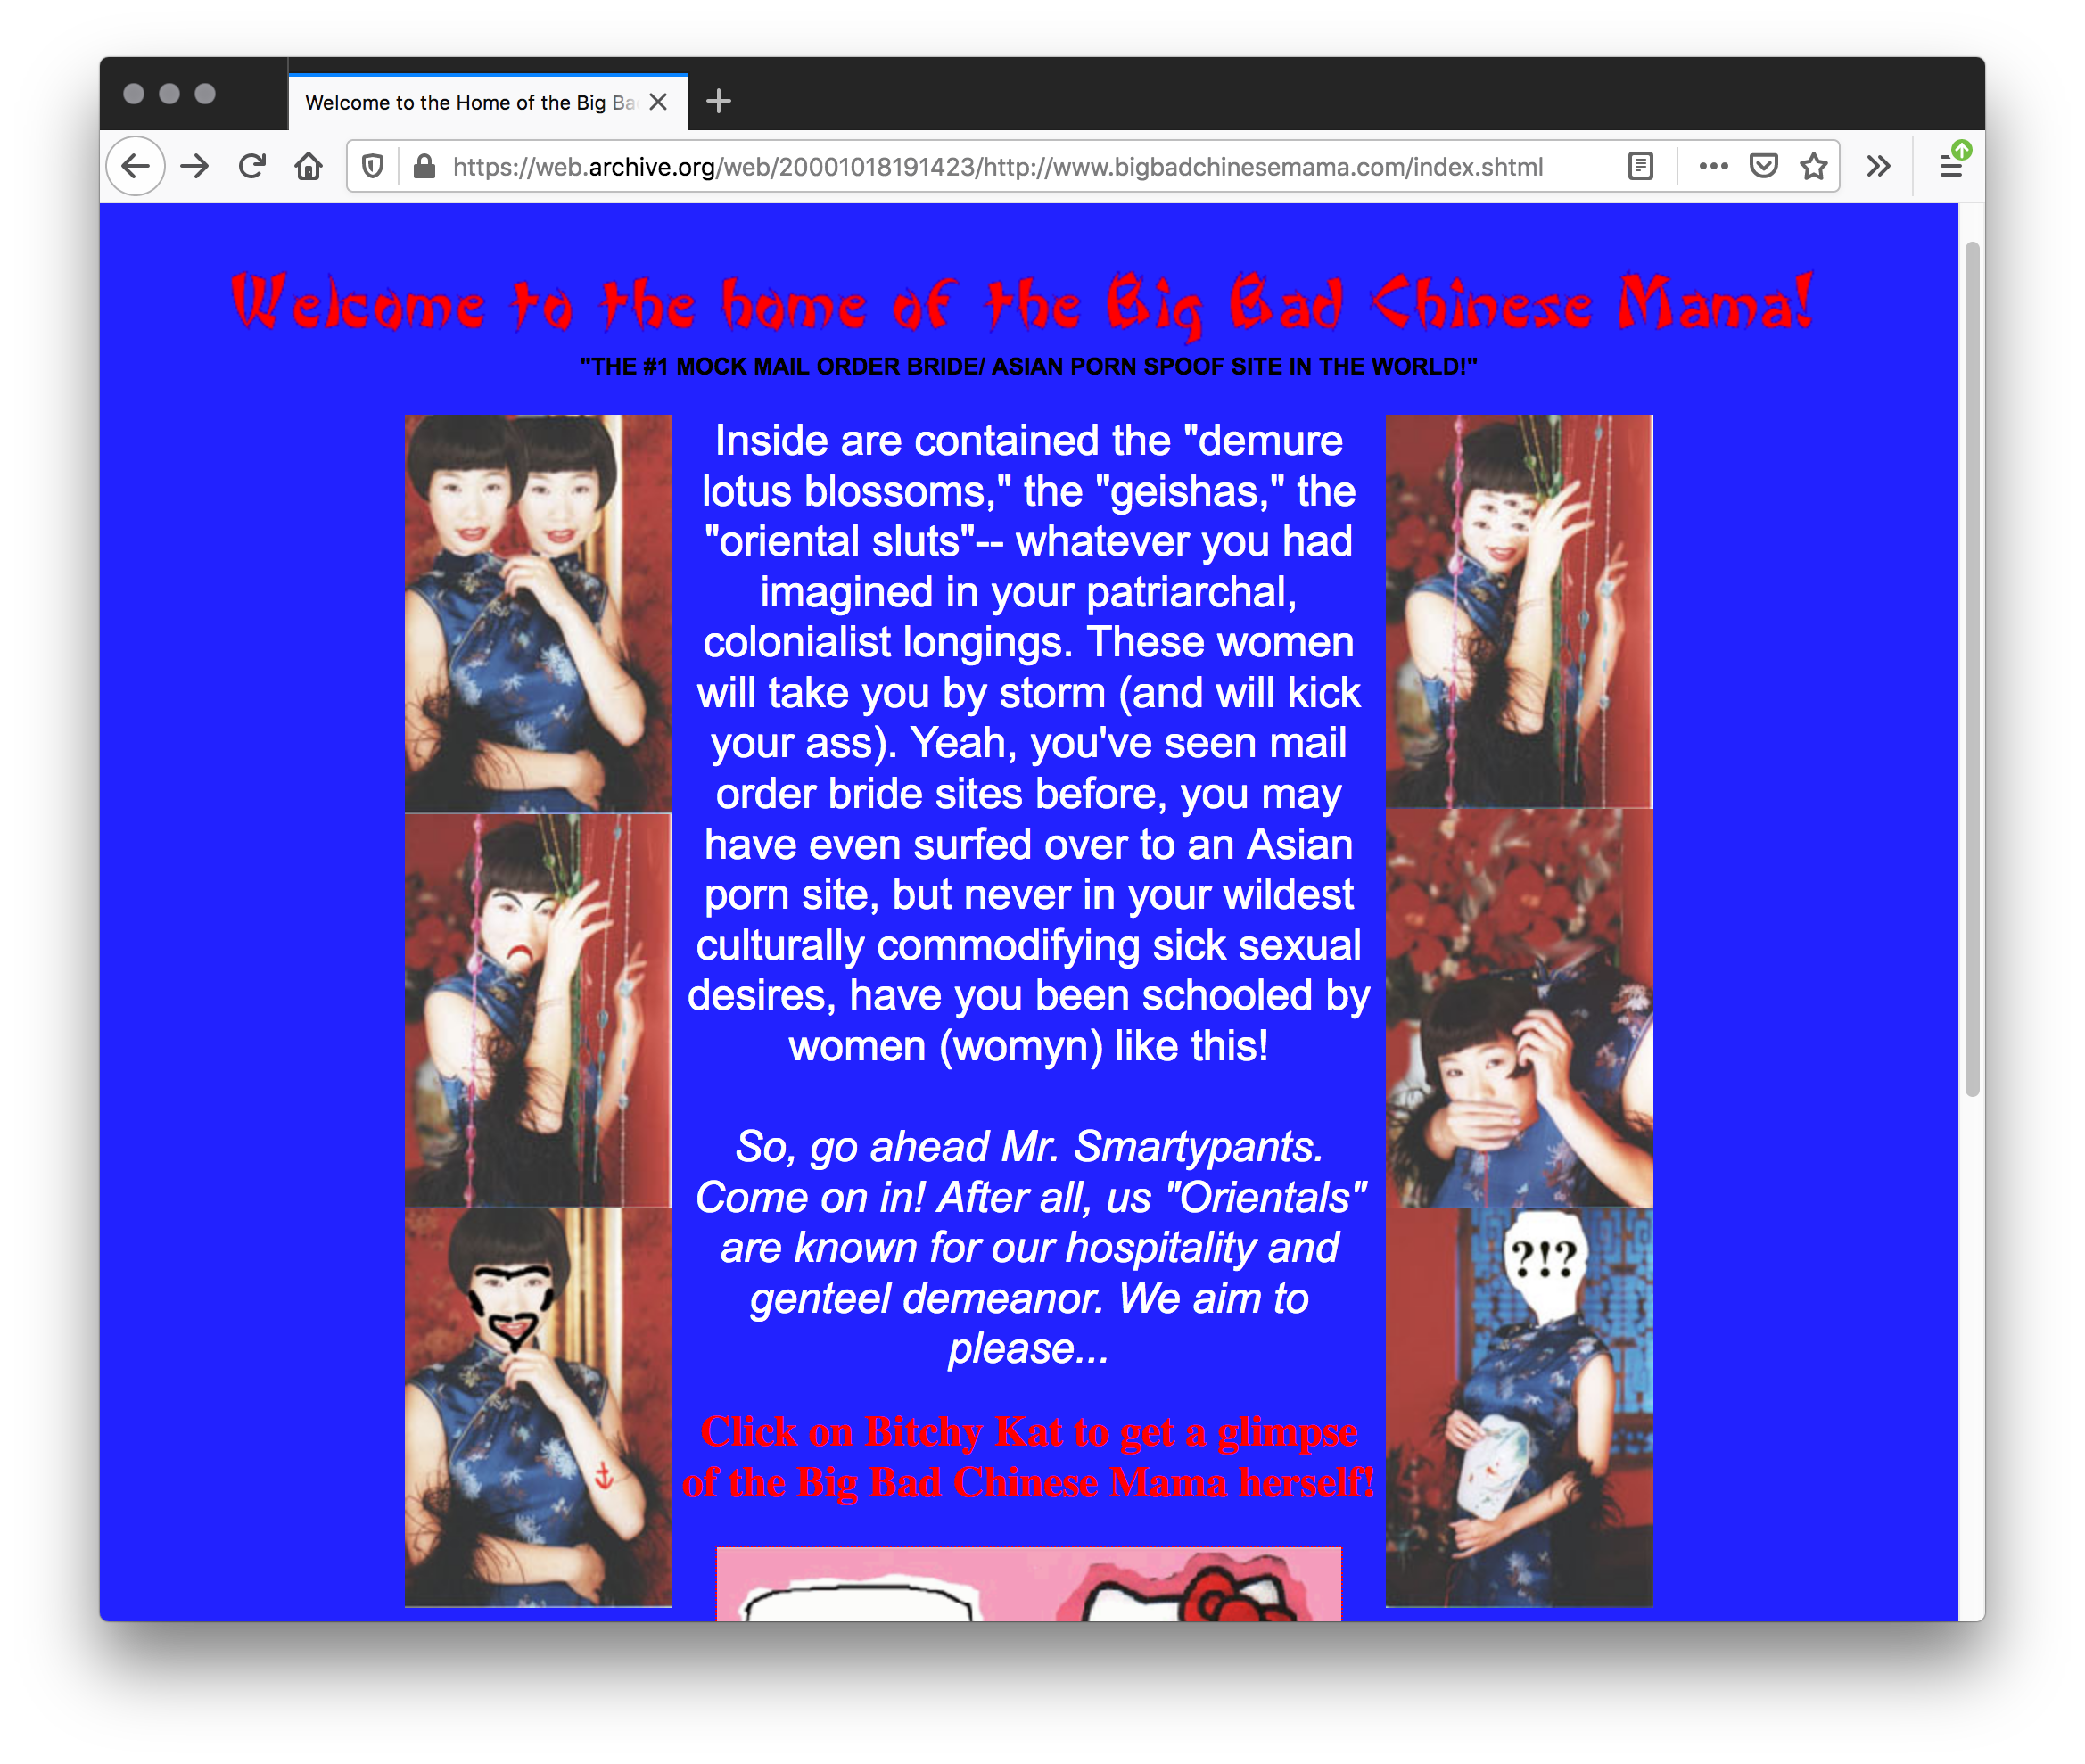 A blue webpage with red text in an oriental font as the header. The center is filled with white and red text in between two columns with images that mock a woman wearing a blue mandarin gown.